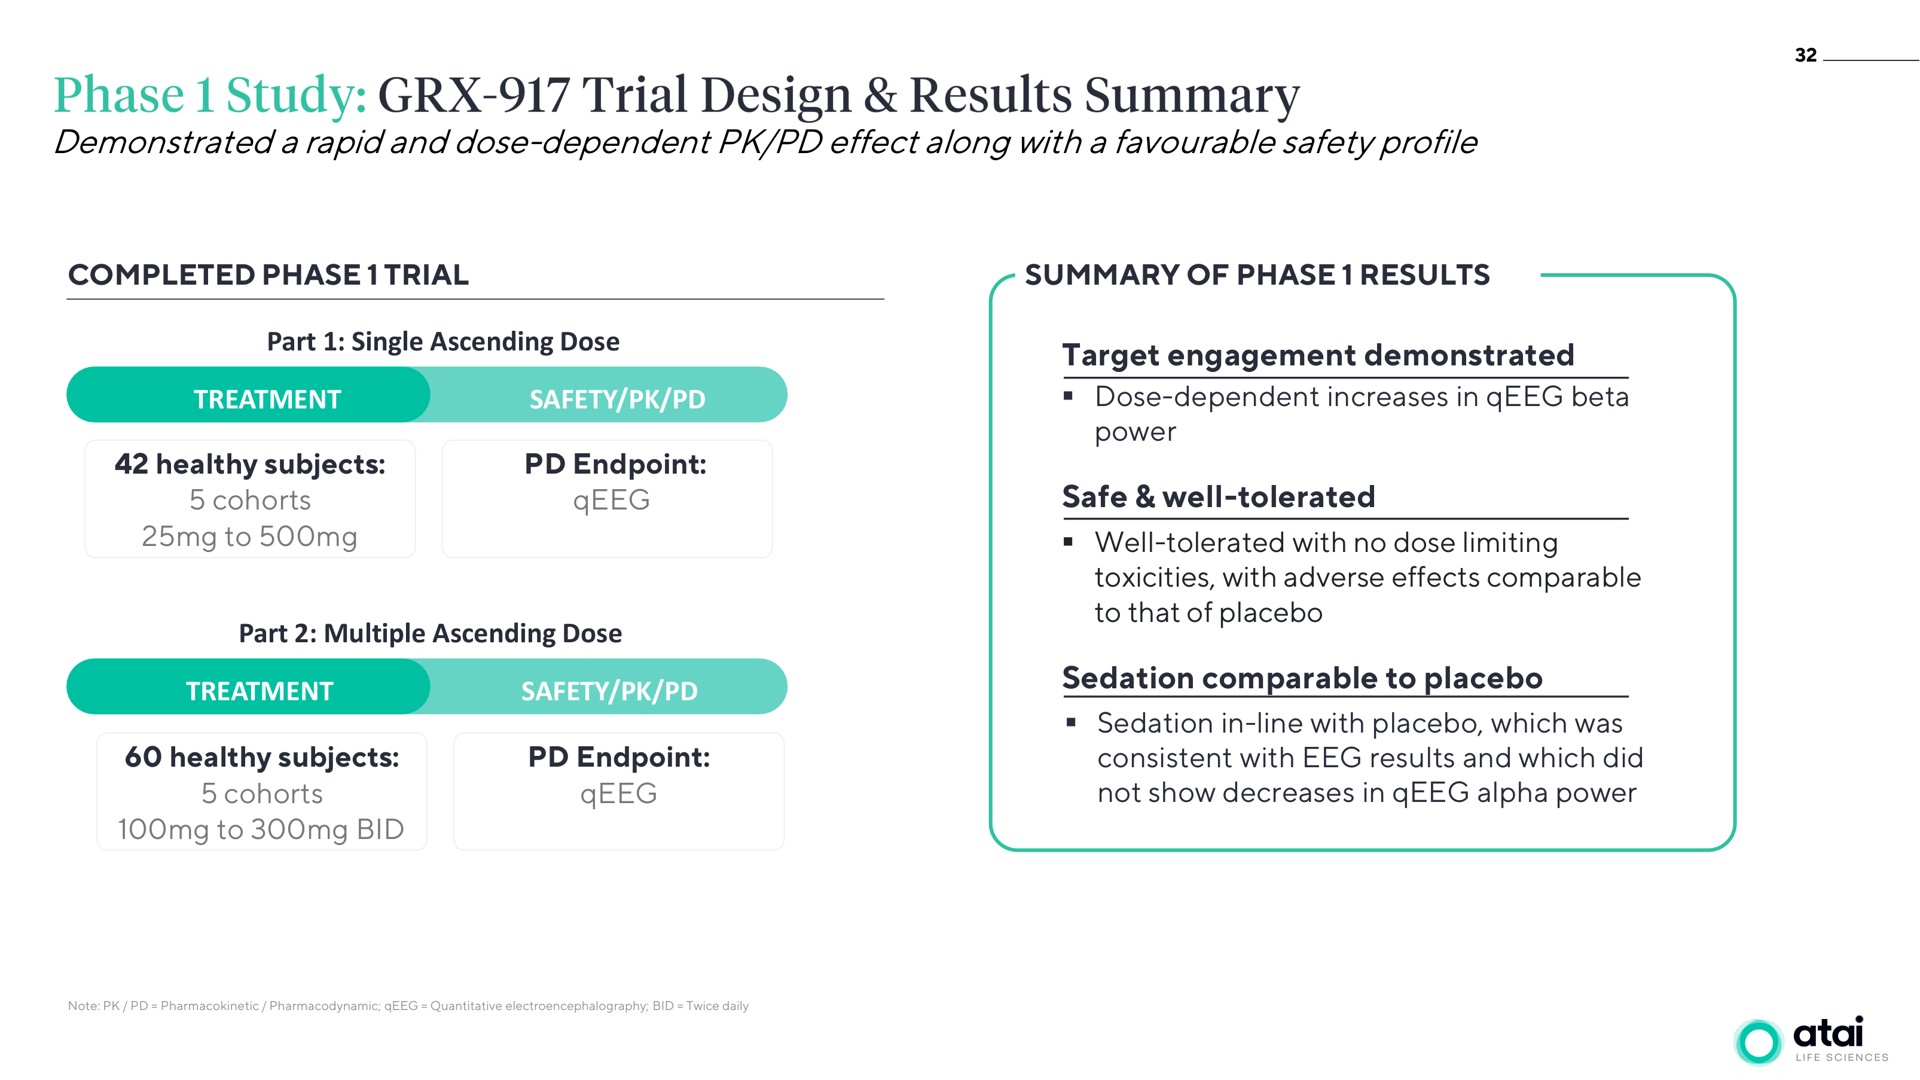 demonstrated a rapid and dose dependent effect along with a safety profile target engagement demonstrated safe well tolerated sedation comparable to placebo phase study trial design results summary | ATAI